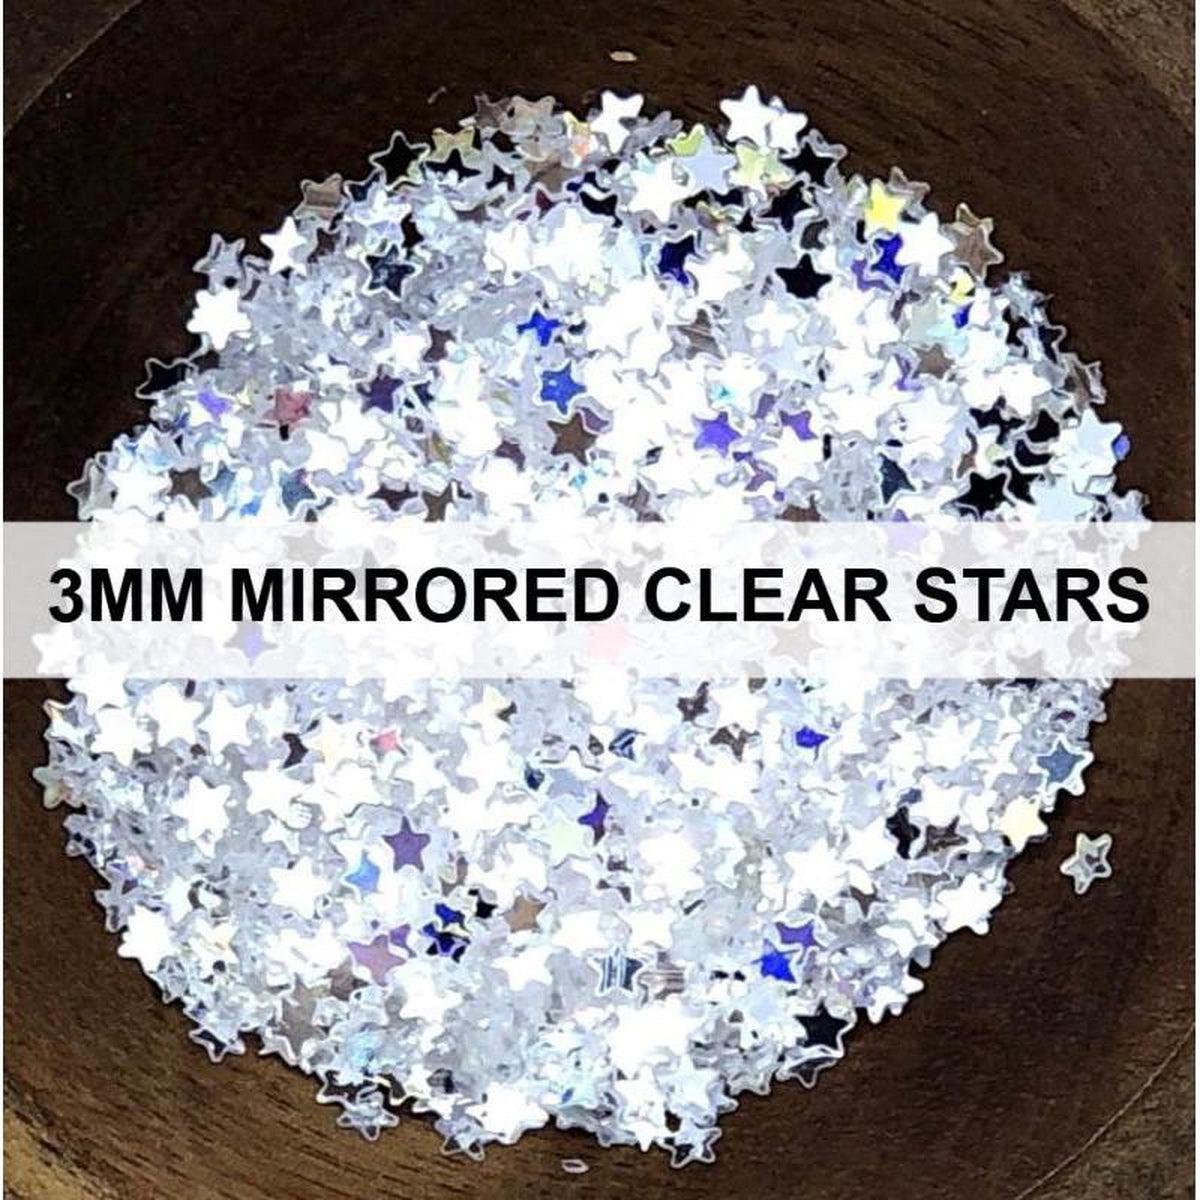 3mm Mirrored Clear Solid Star Sequins